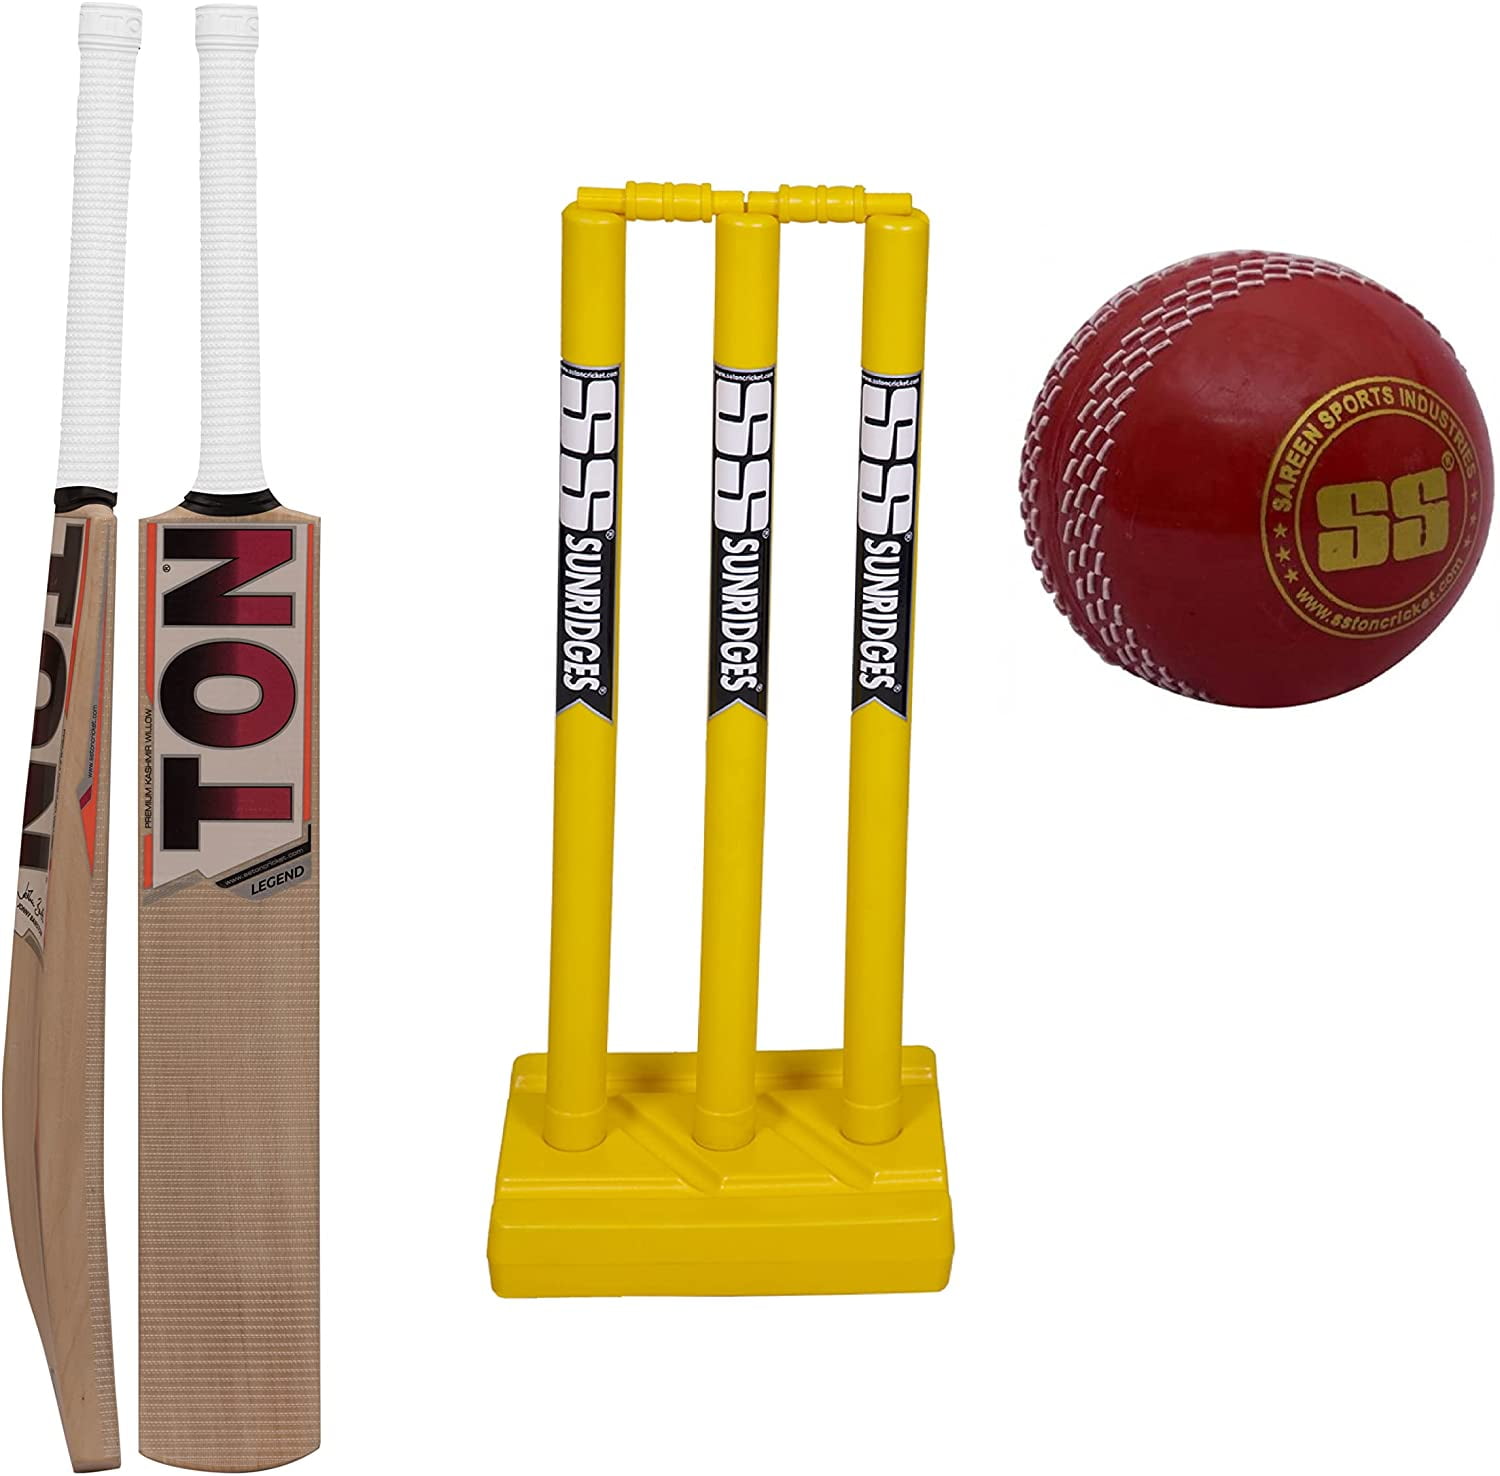 Cricket Set For Kids With A Bat Ball Bails And Stumps Size 3 or 5 Kids Cricket 